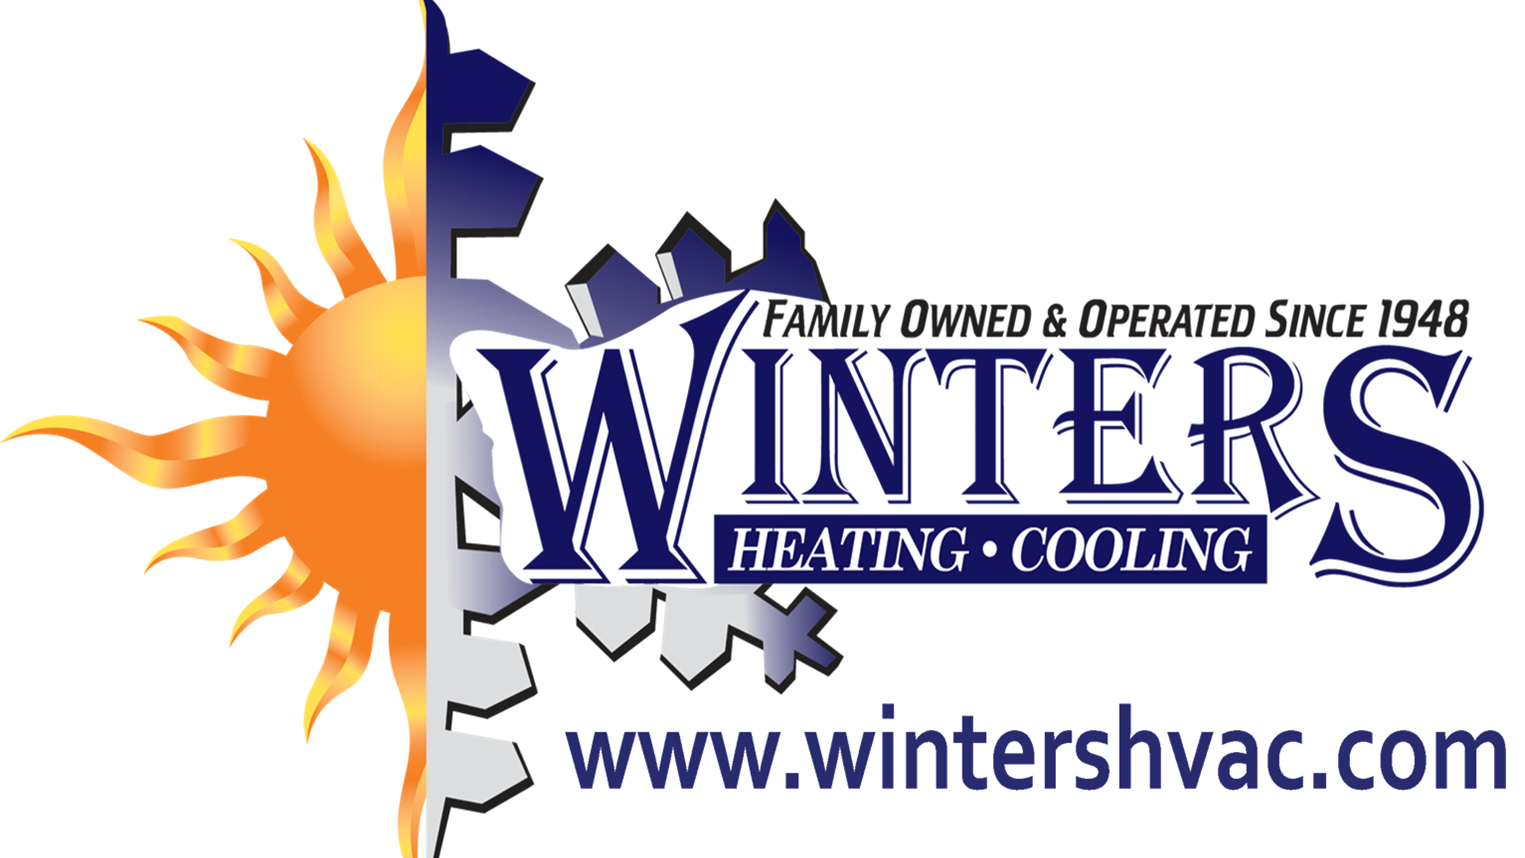 Winters Heating & Cooling 22100 Point Lookout Rd, Leonardtown Maryland 20650